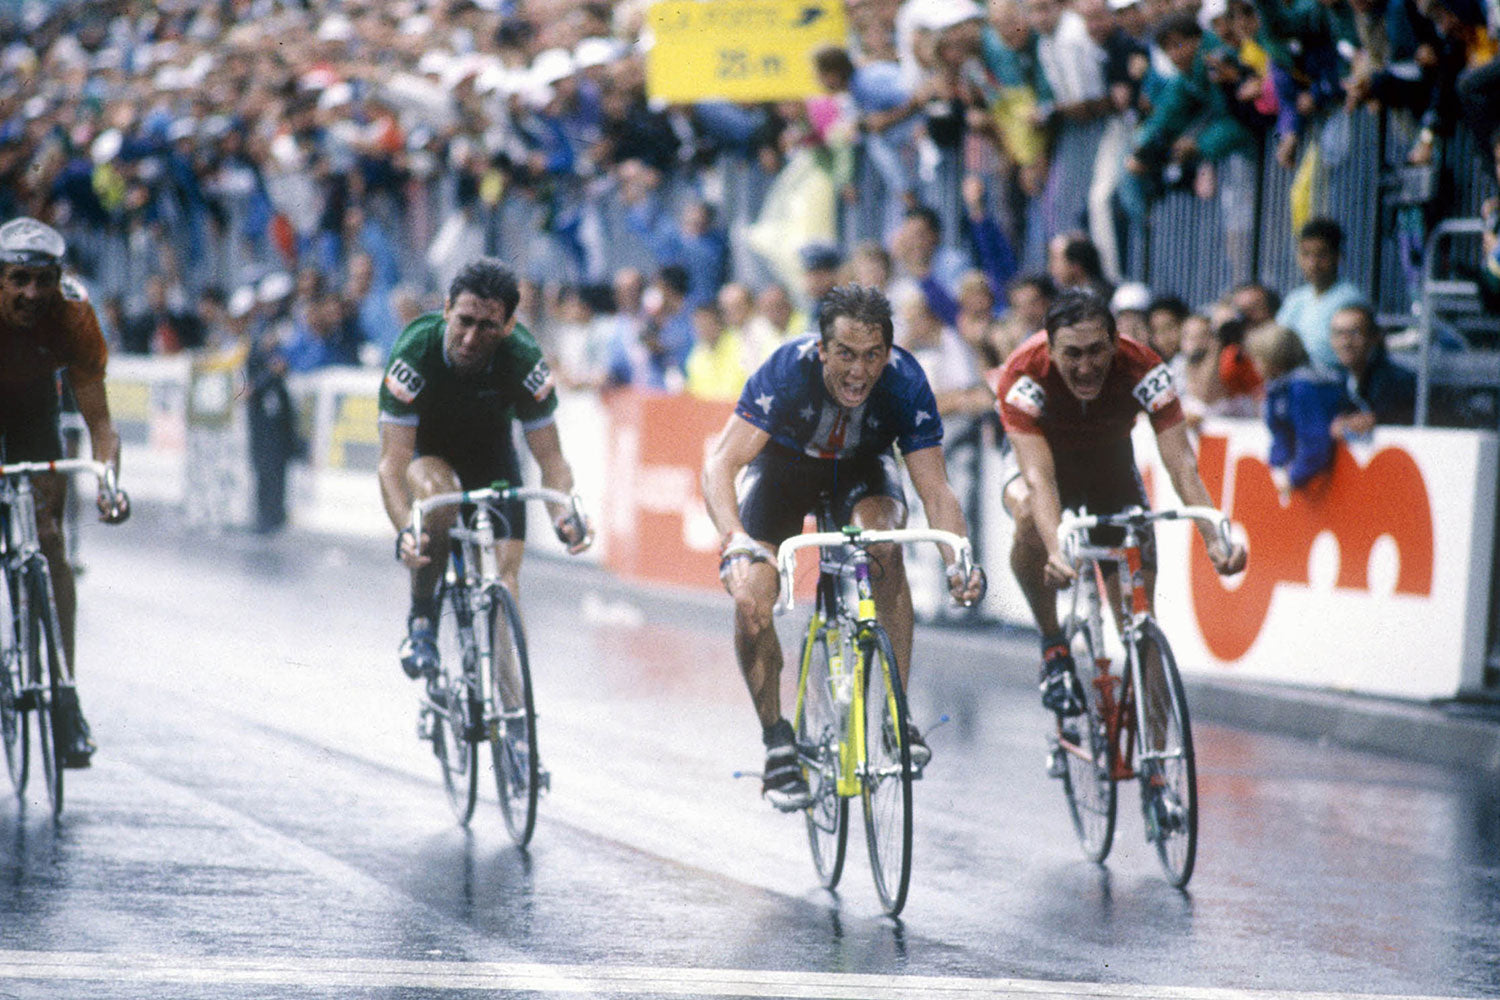 See the incredible delight captured by A. Landrain in Greg Lemond's face having sprinted to victory at the 1989 UCI Road World Championships in Chambéry, France. Photo Credit: Press Sports / L'Equipe.